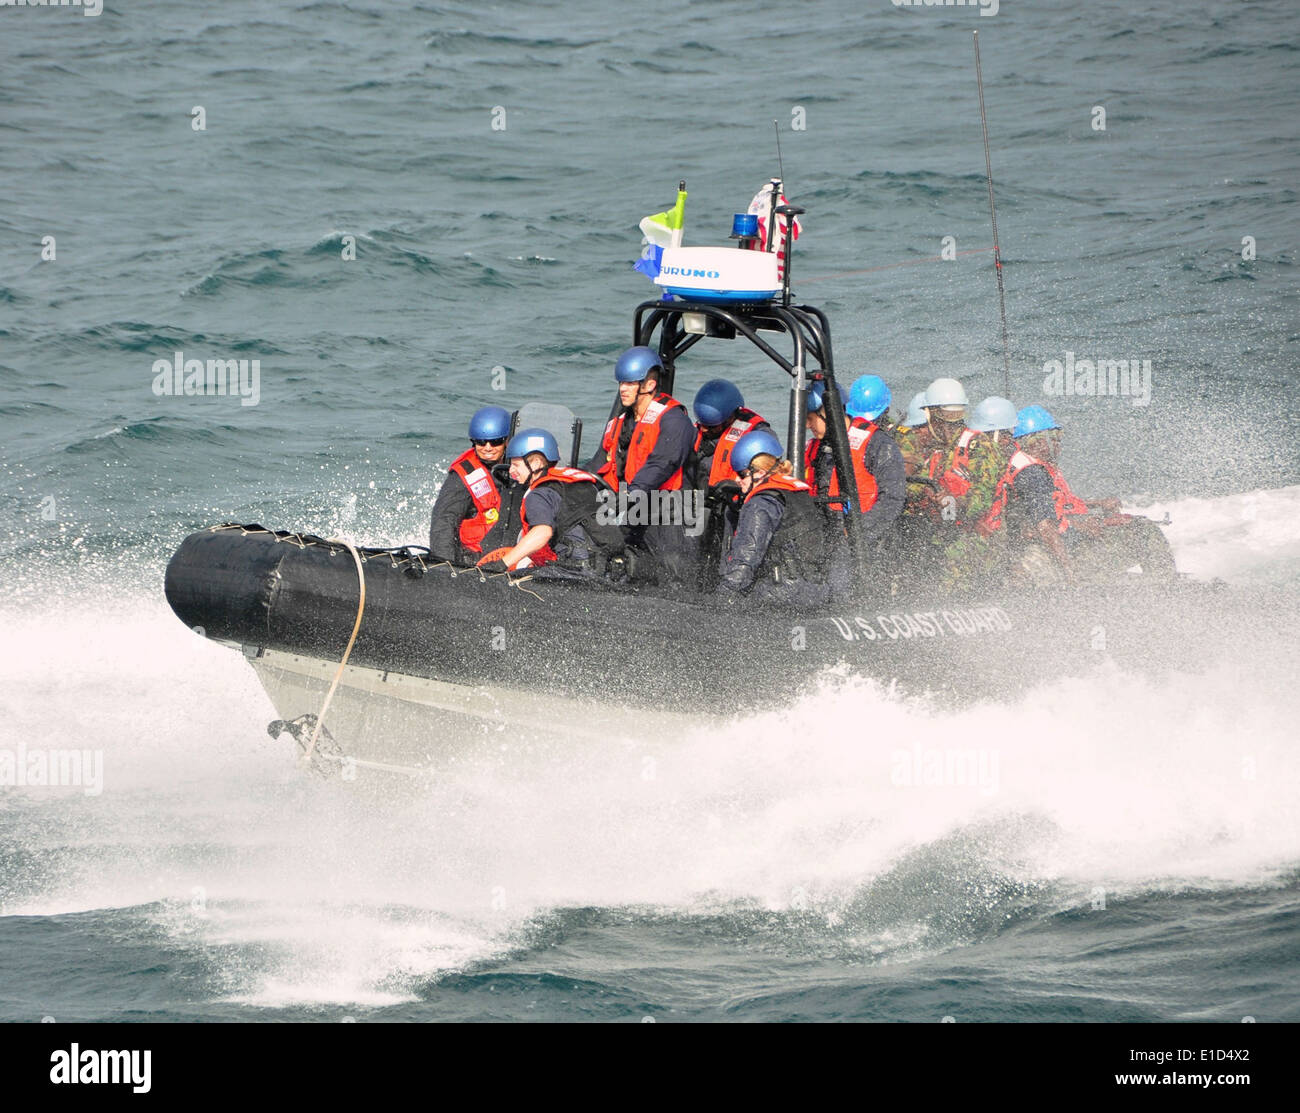 100730-N-3349L-026 GULF OF GUINEA (July 30, 2010) - Members of a visit, board, search and seizure team from U.S. Coast Guard C Stock Photo